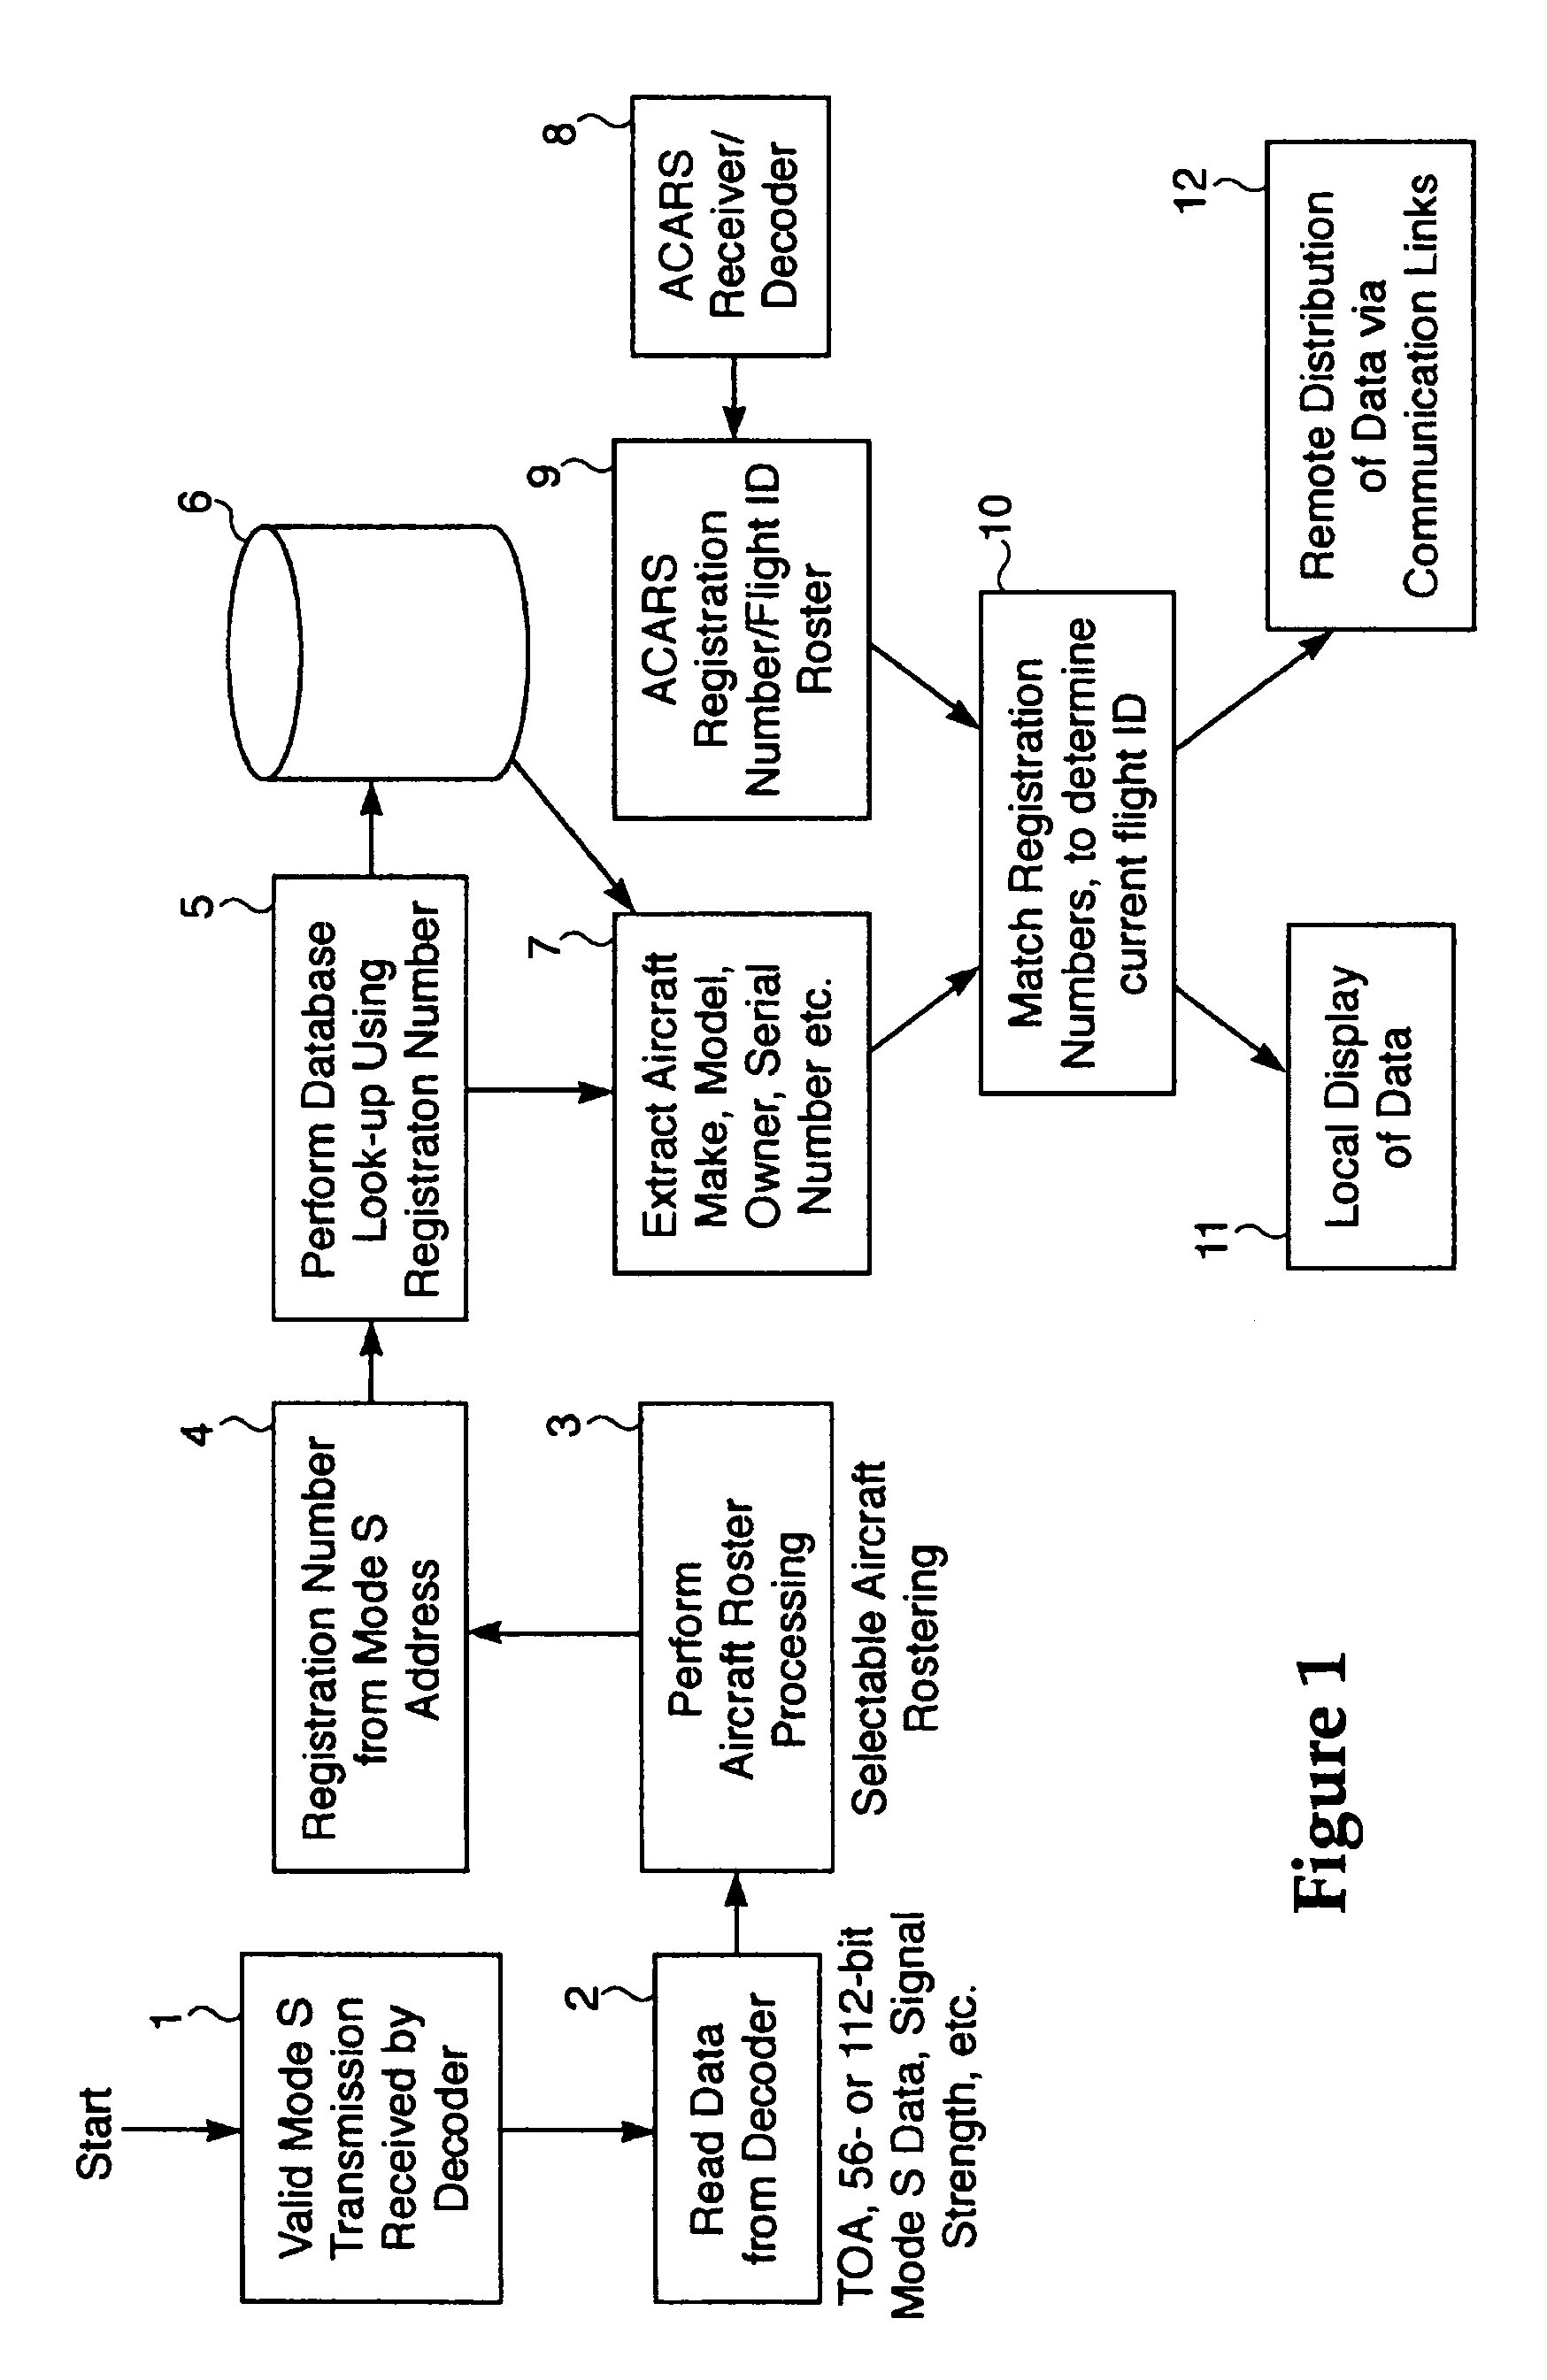 Method and apparatus for accurate aircraft and vehicle tracking